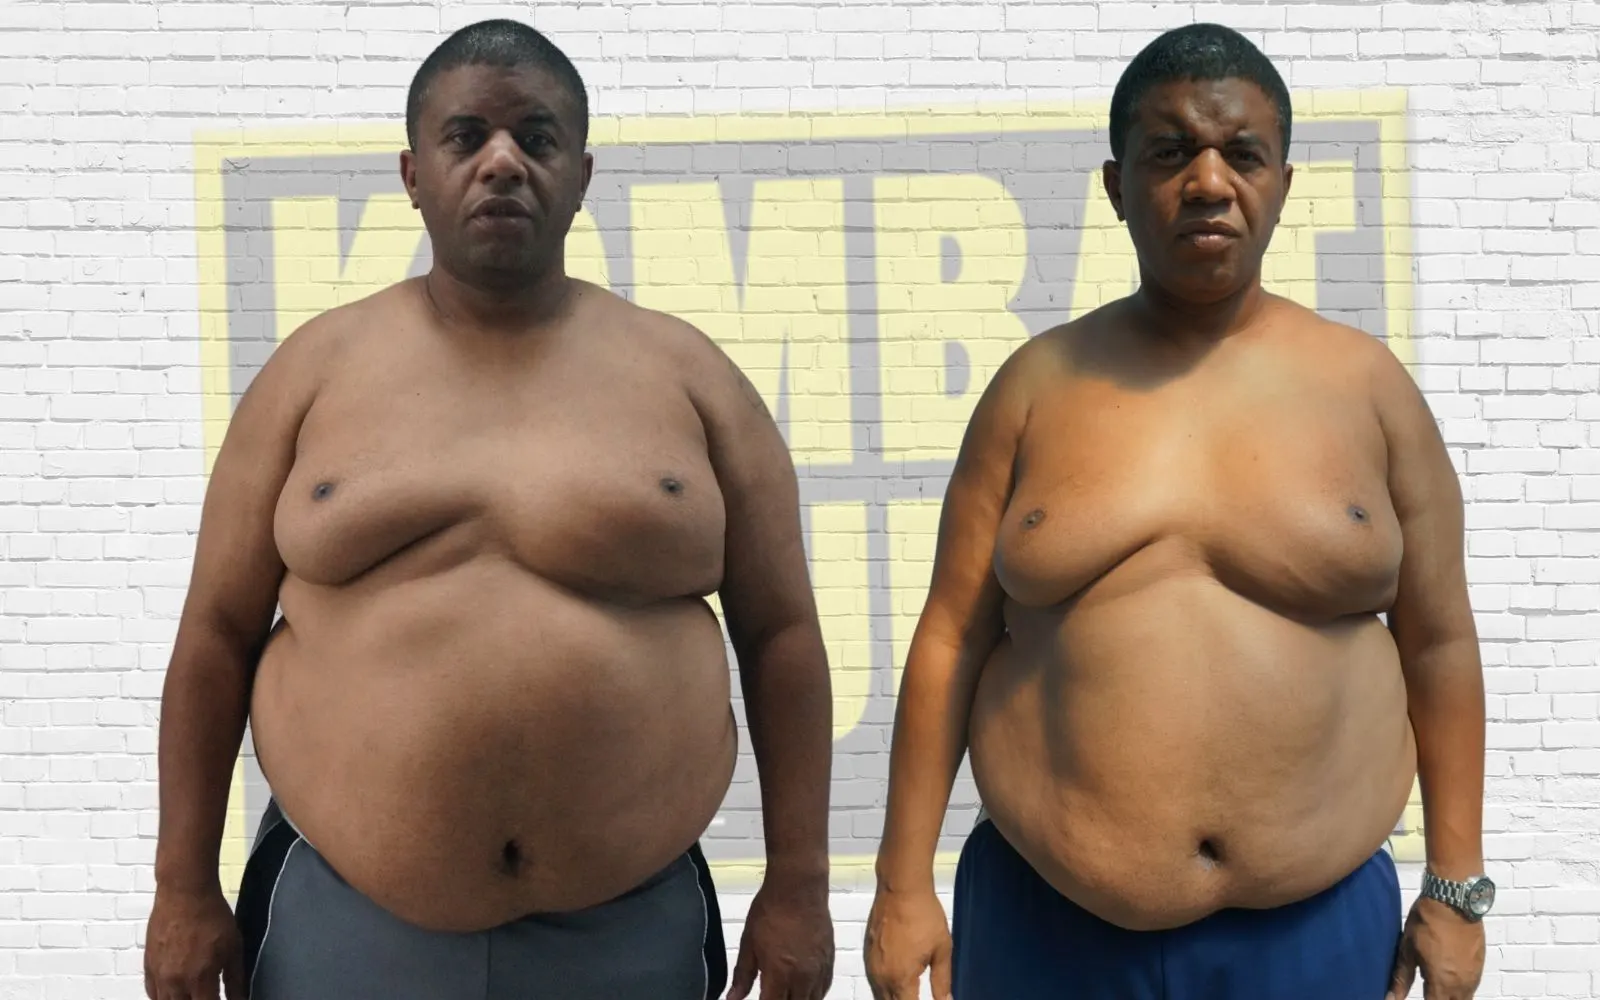 Winston results photo before and after Kombat group's training program